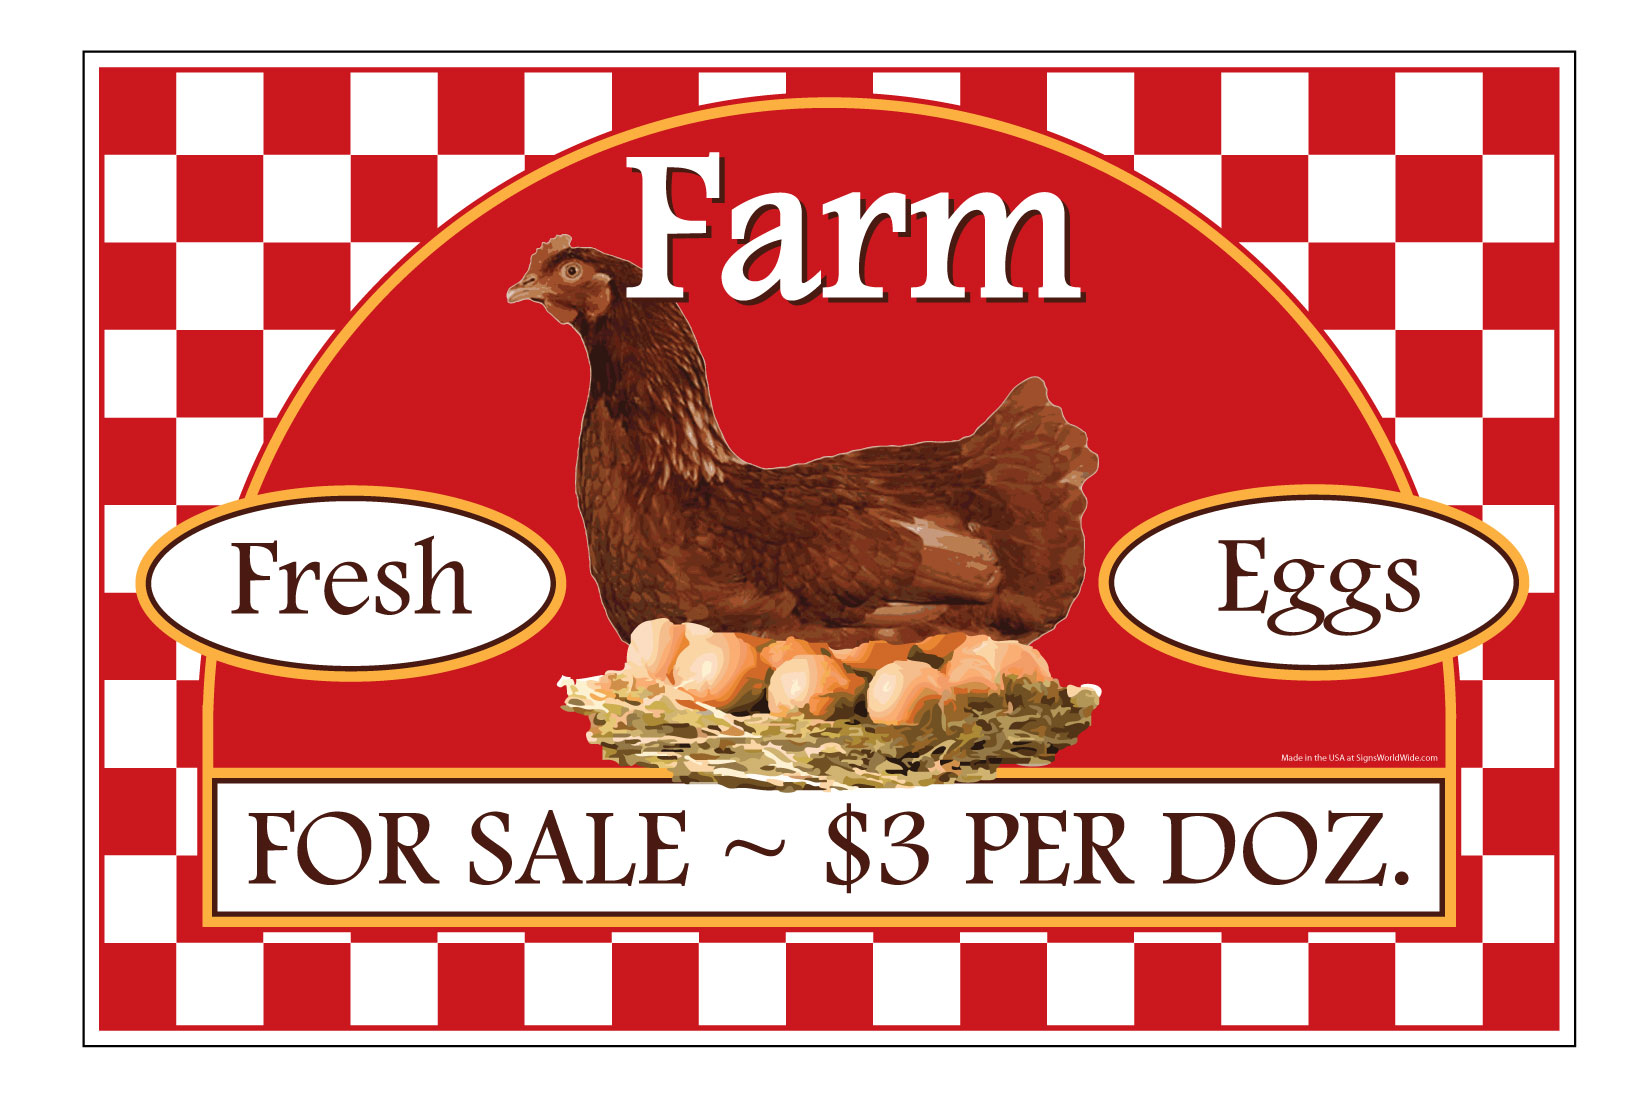 Printable Eggs For Sale Sign